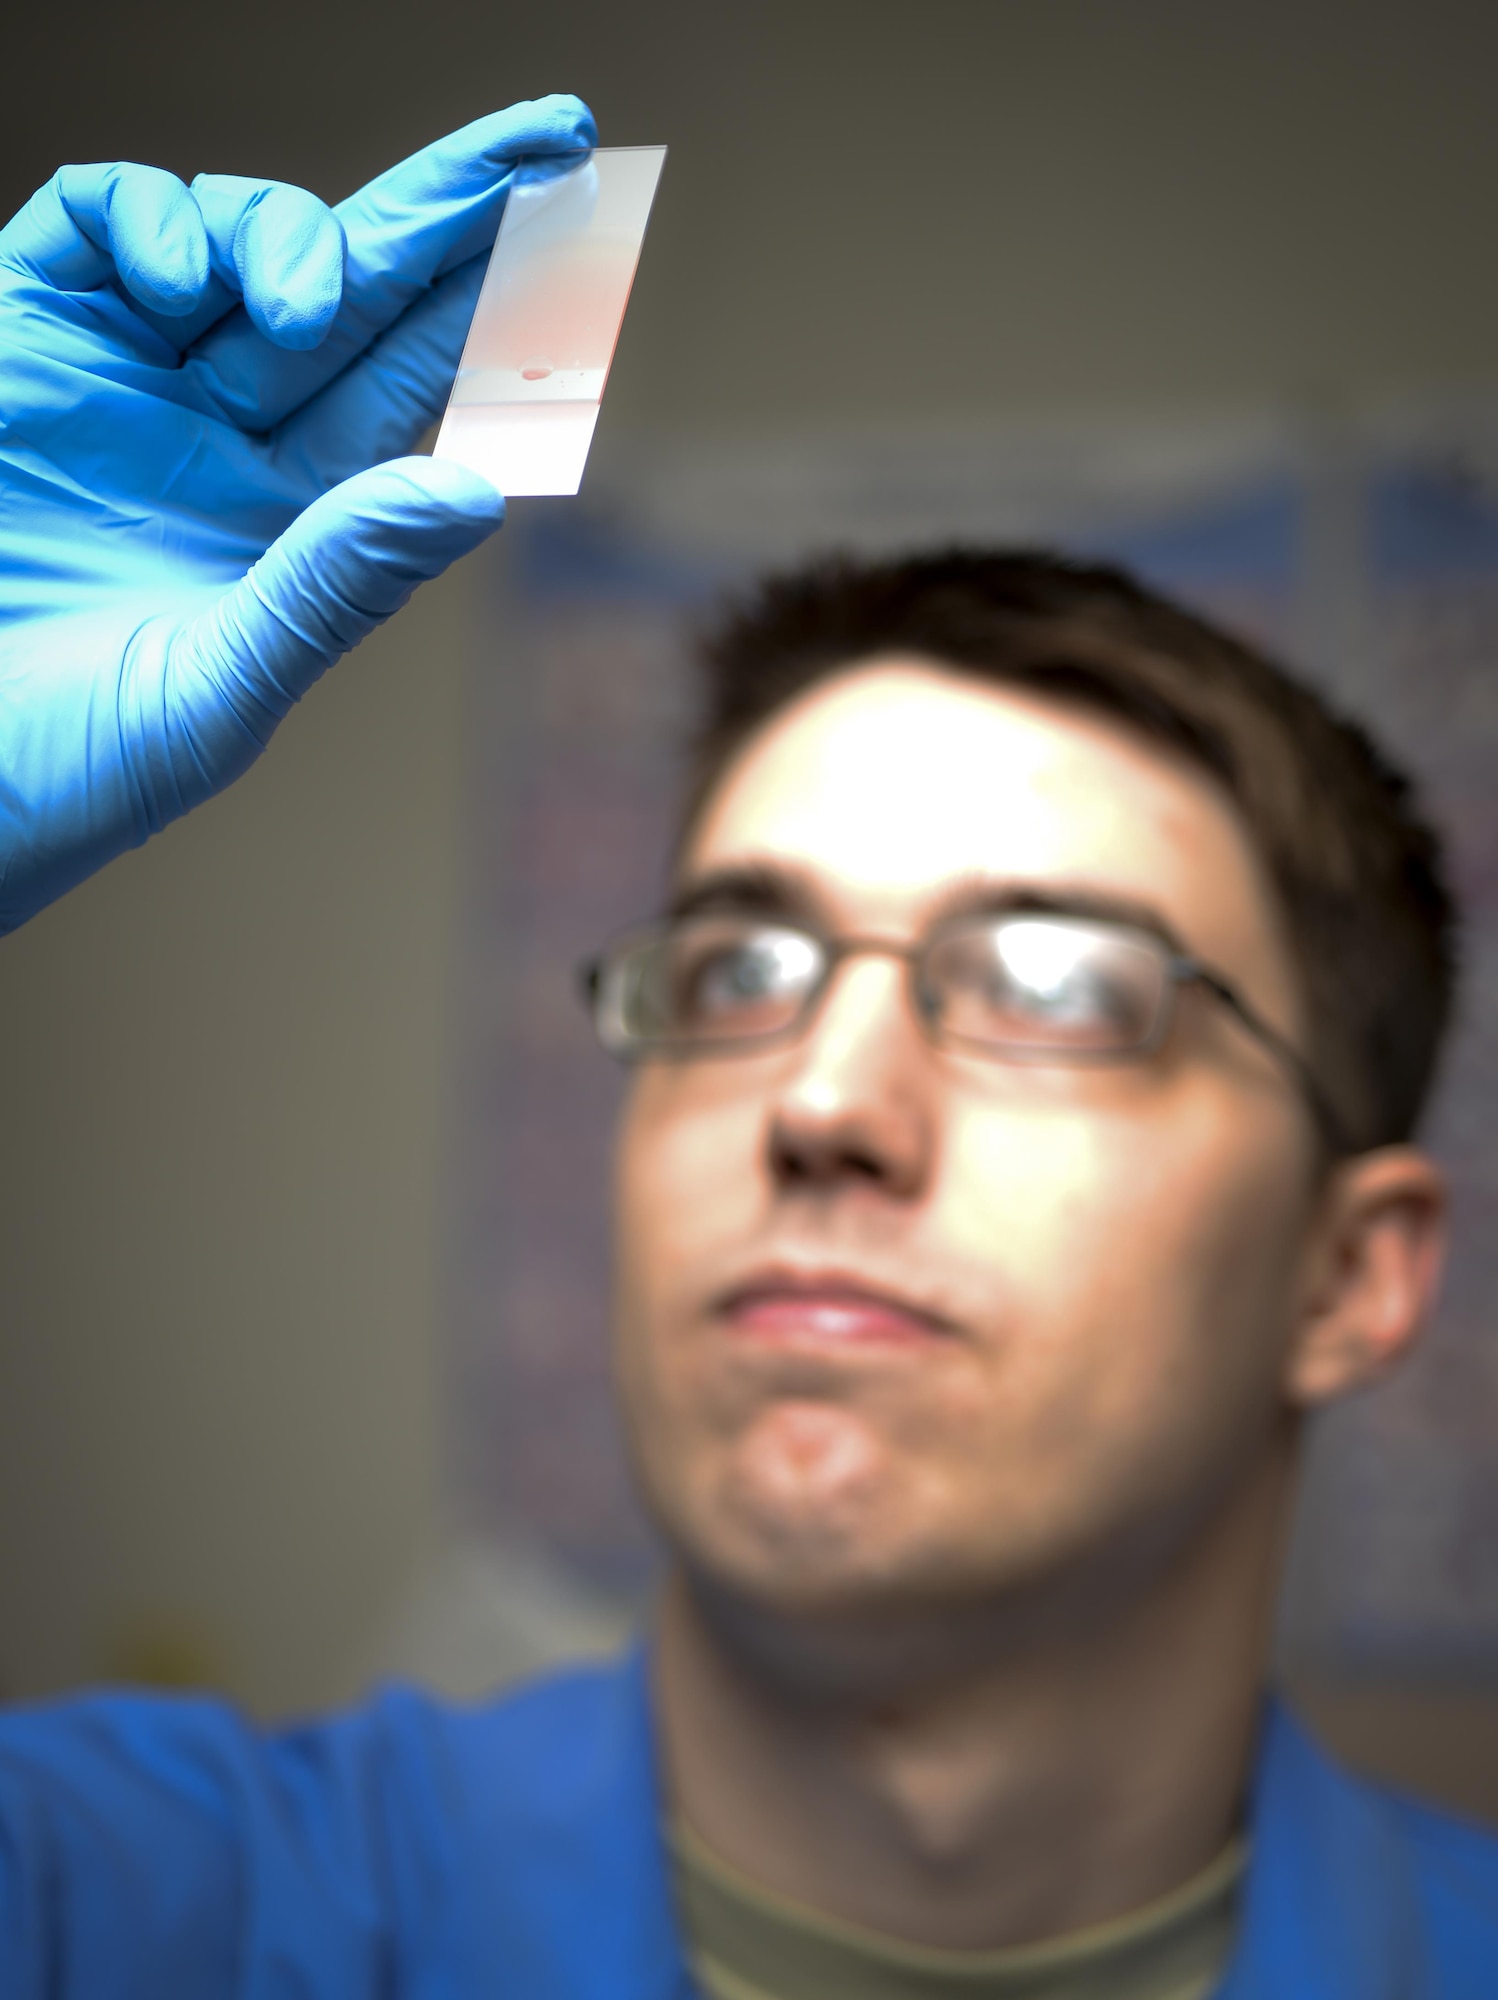 Senior Airman Josef Ansorge, 2nd Medical Support Squadron laboratory technician, visually inspects a blood smear slide at Barksdale Air Force Base, La., Jan. 26, 2016. He performed the visual inspections to provide doctors with information used in the diagnosis of a variety of health conditions.  (U.S. Air Force photo/Airman 1st Class Mozer O. Da Cunha)